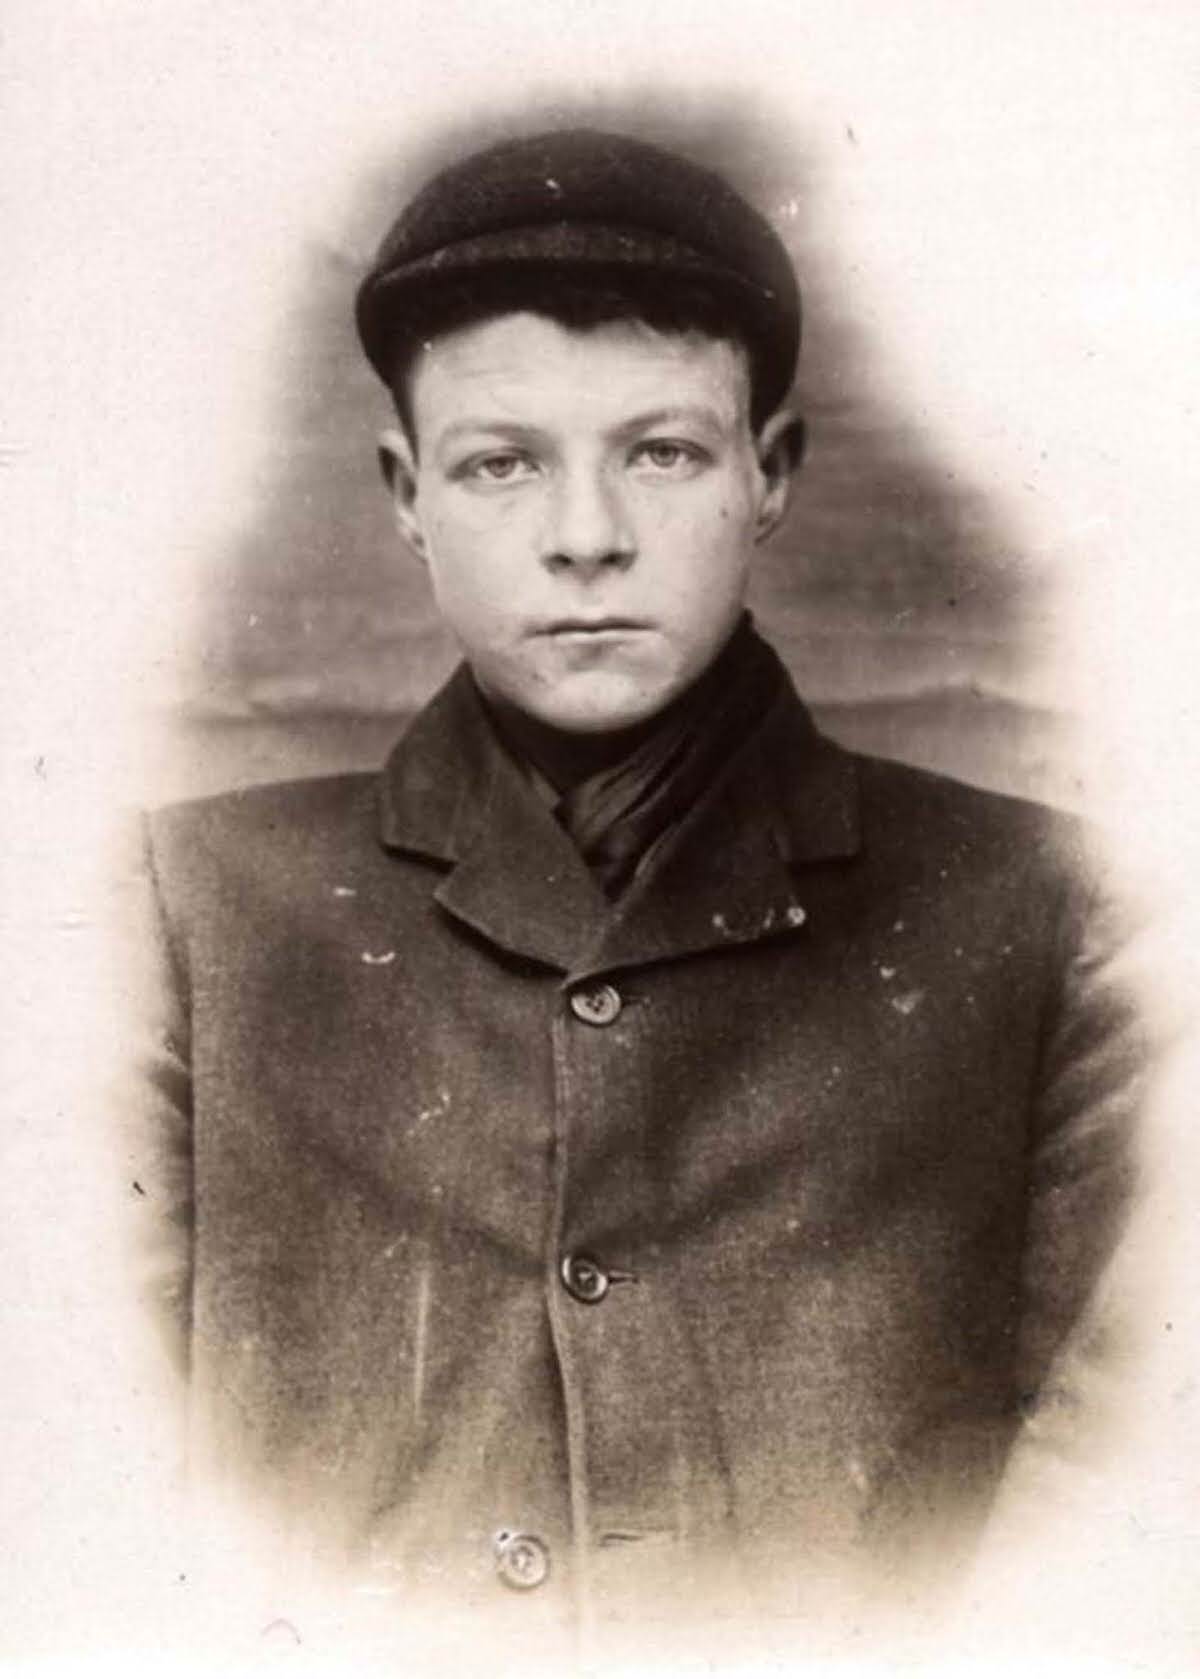 Percy Swallow, 16, arrested for stealing a watch, 1907.